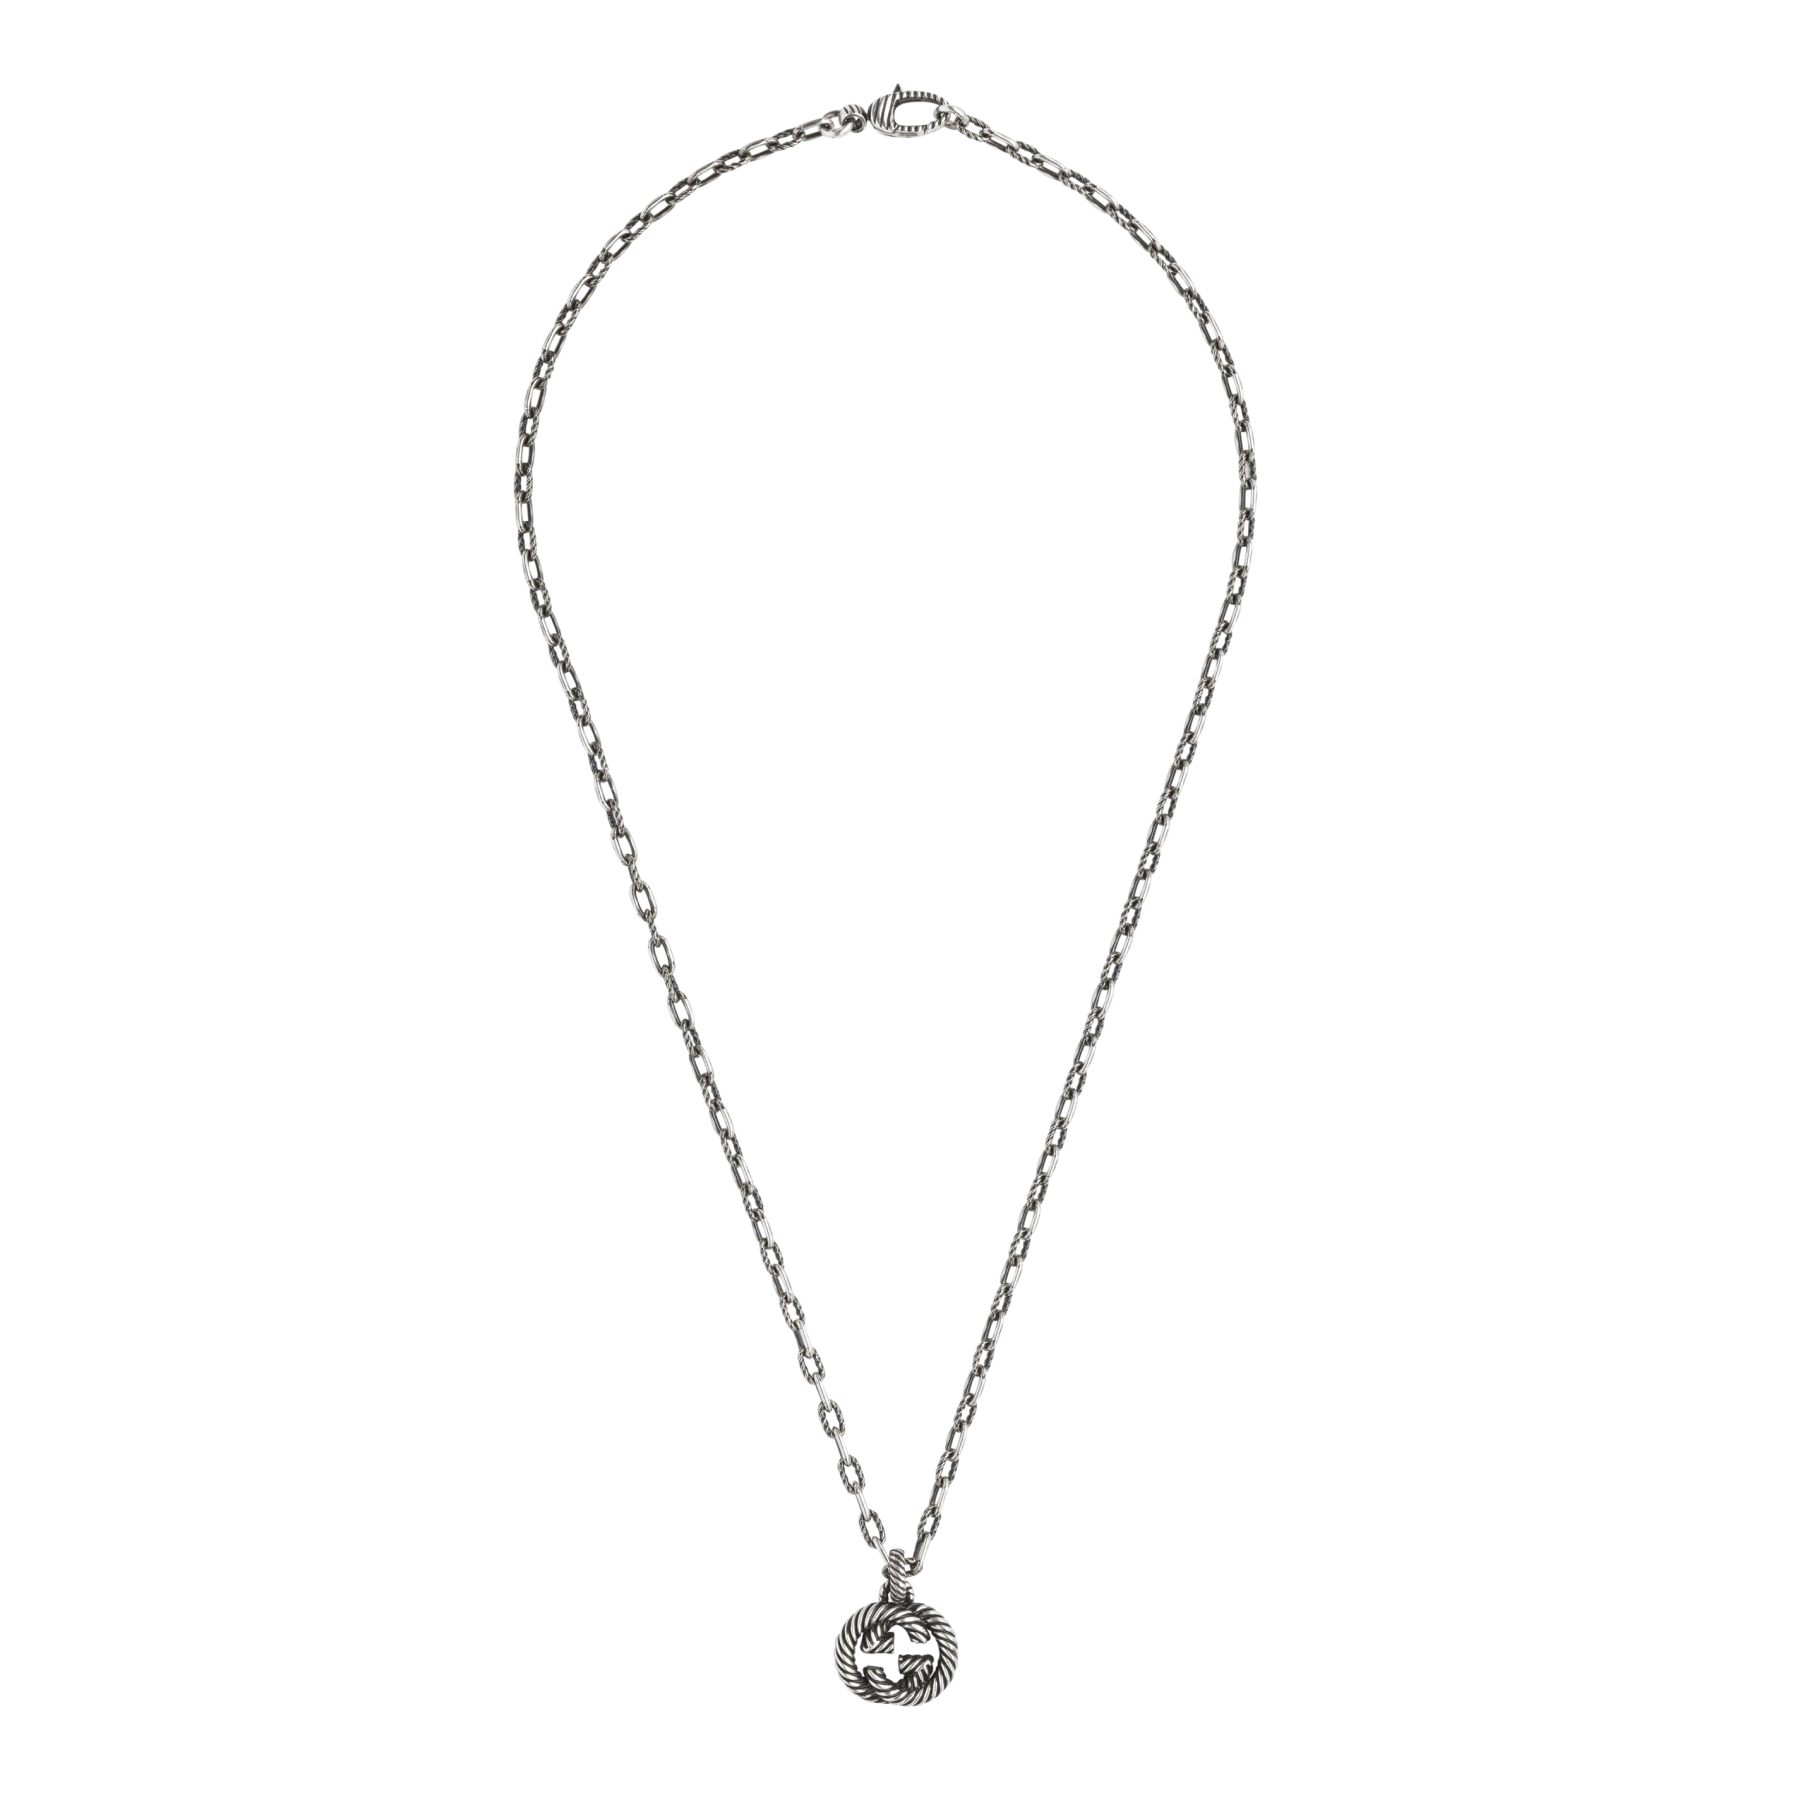 Gucci Interlocking G Link Necklace in Sterling Silver